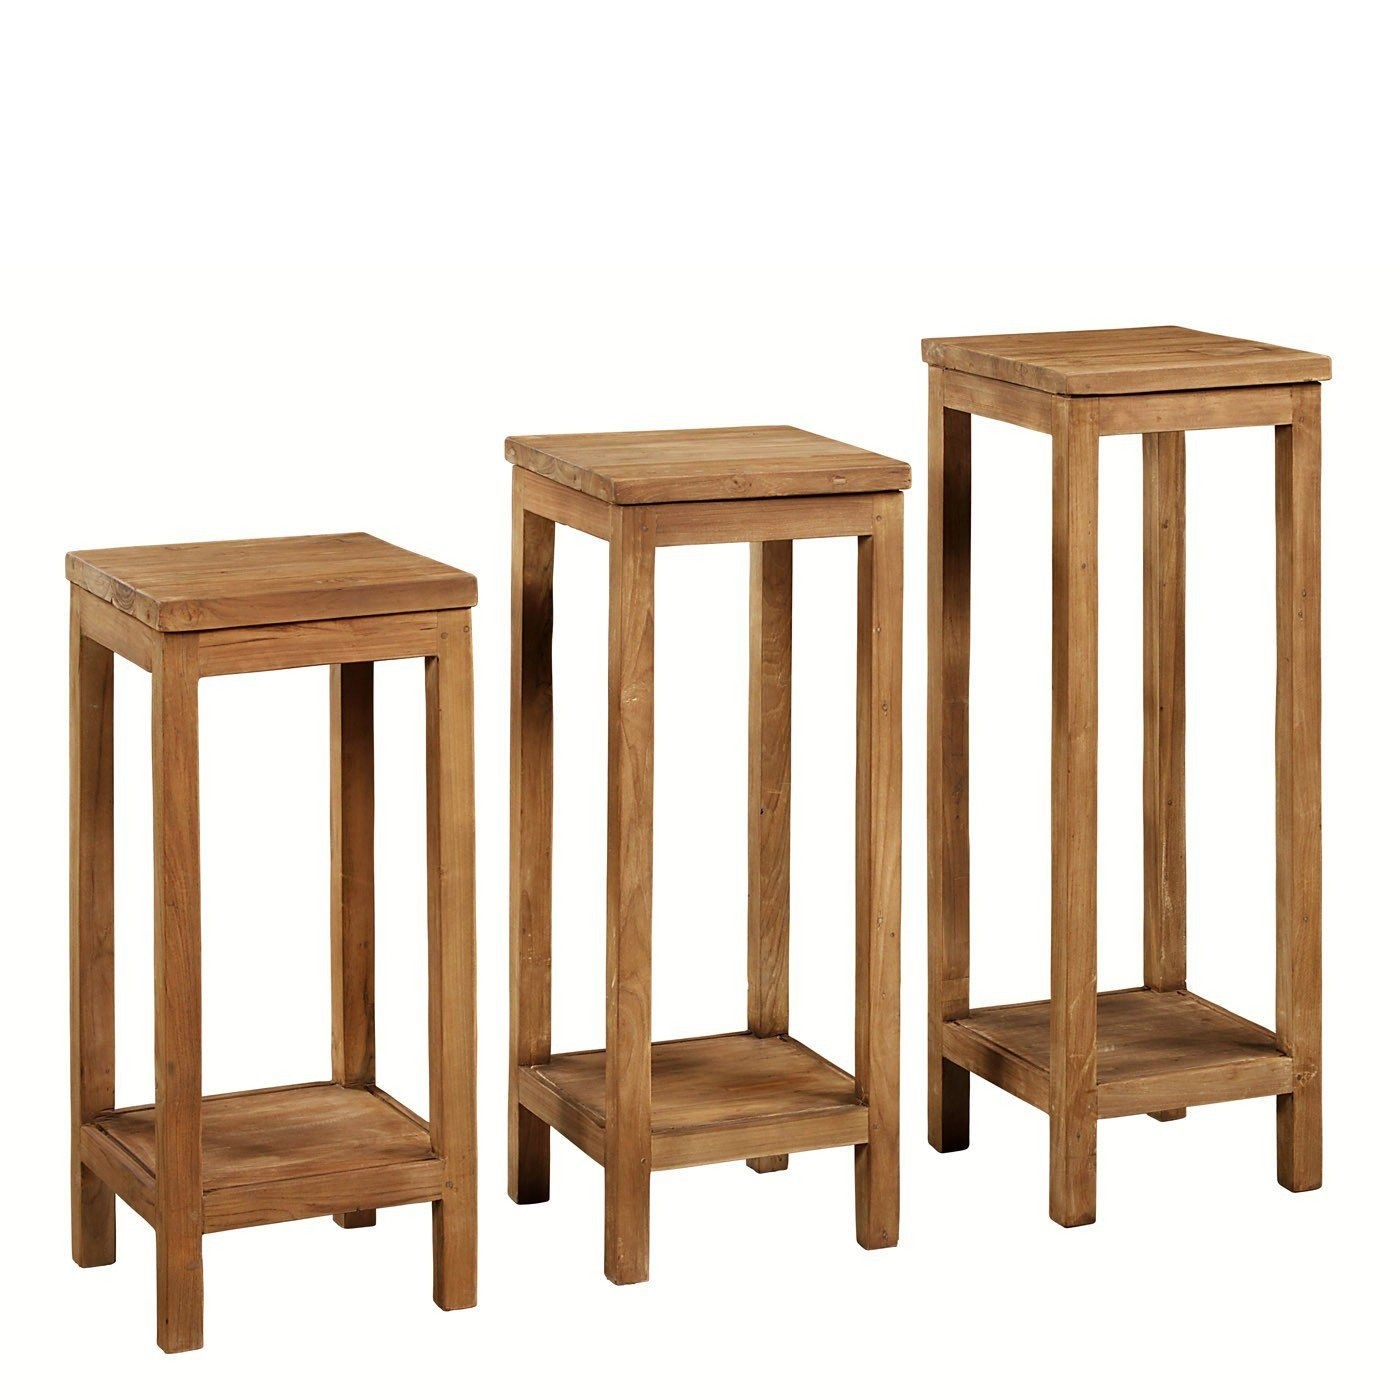 Plant stand wooden plant stands indoor wooden plant